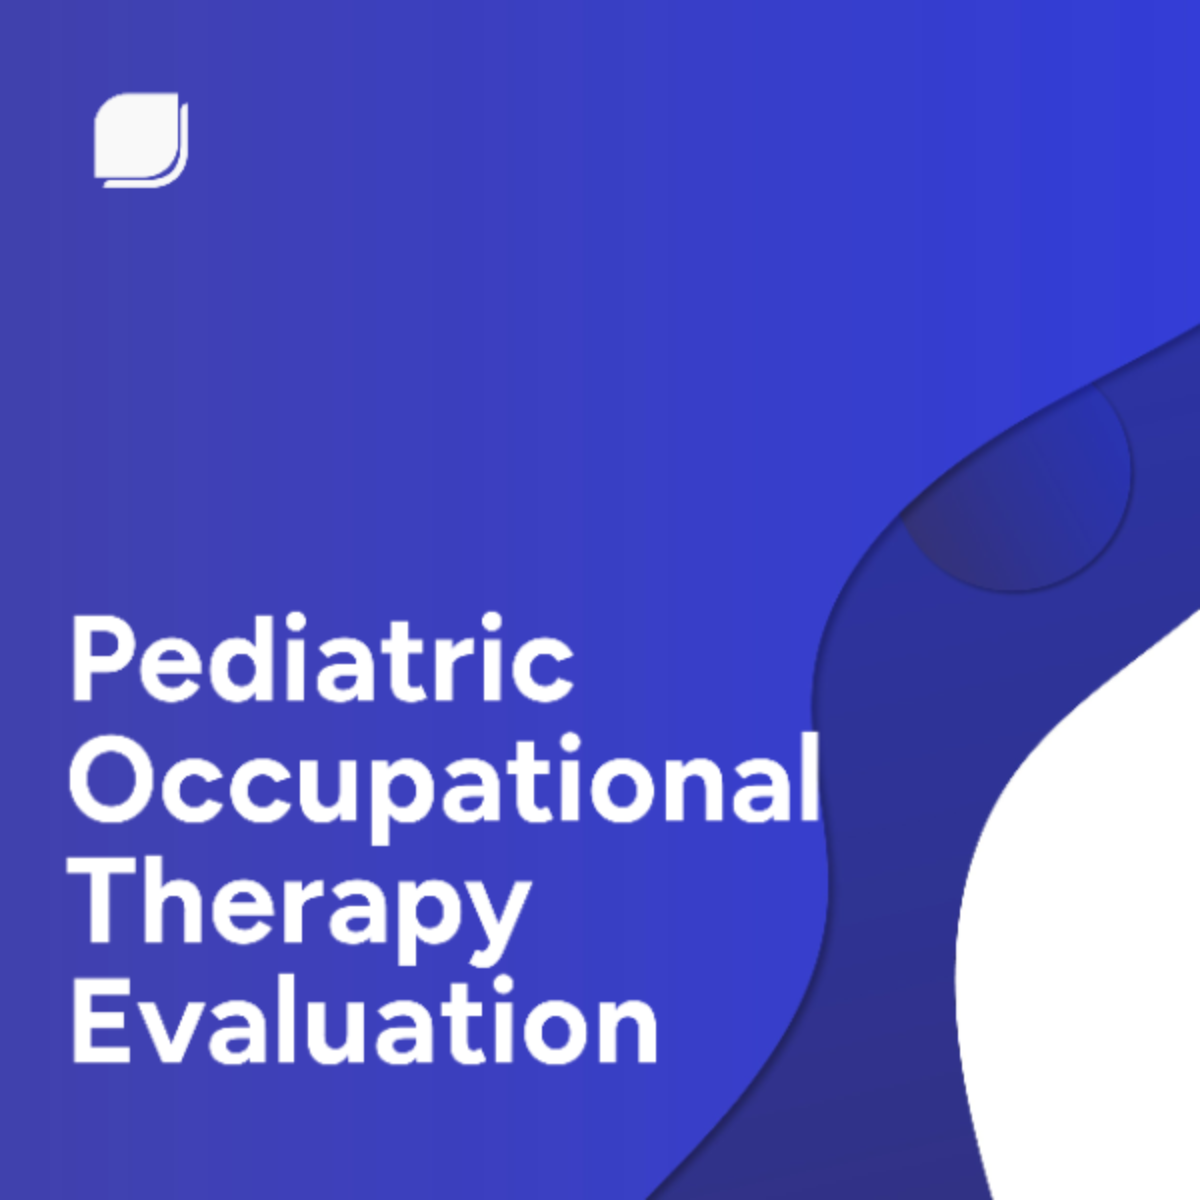 Pediatric Occupational Therapy Evaluation Template